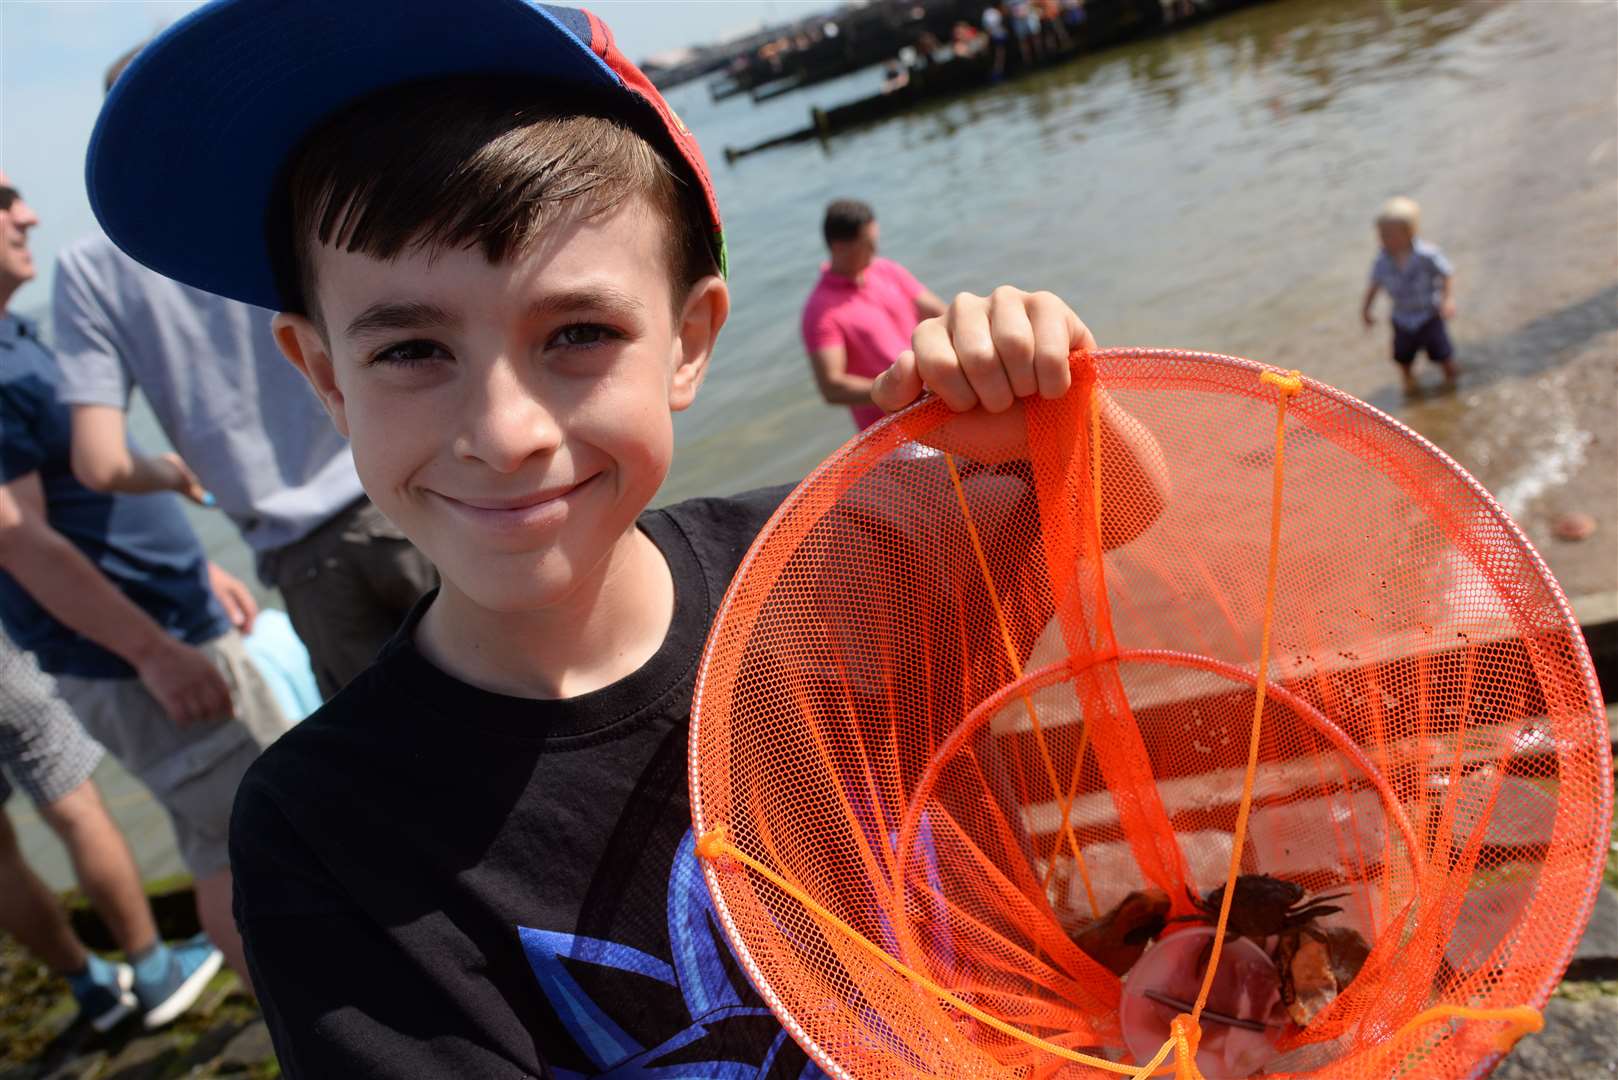 Kids can join the crabbing competition at Whitstable Oyster Festival